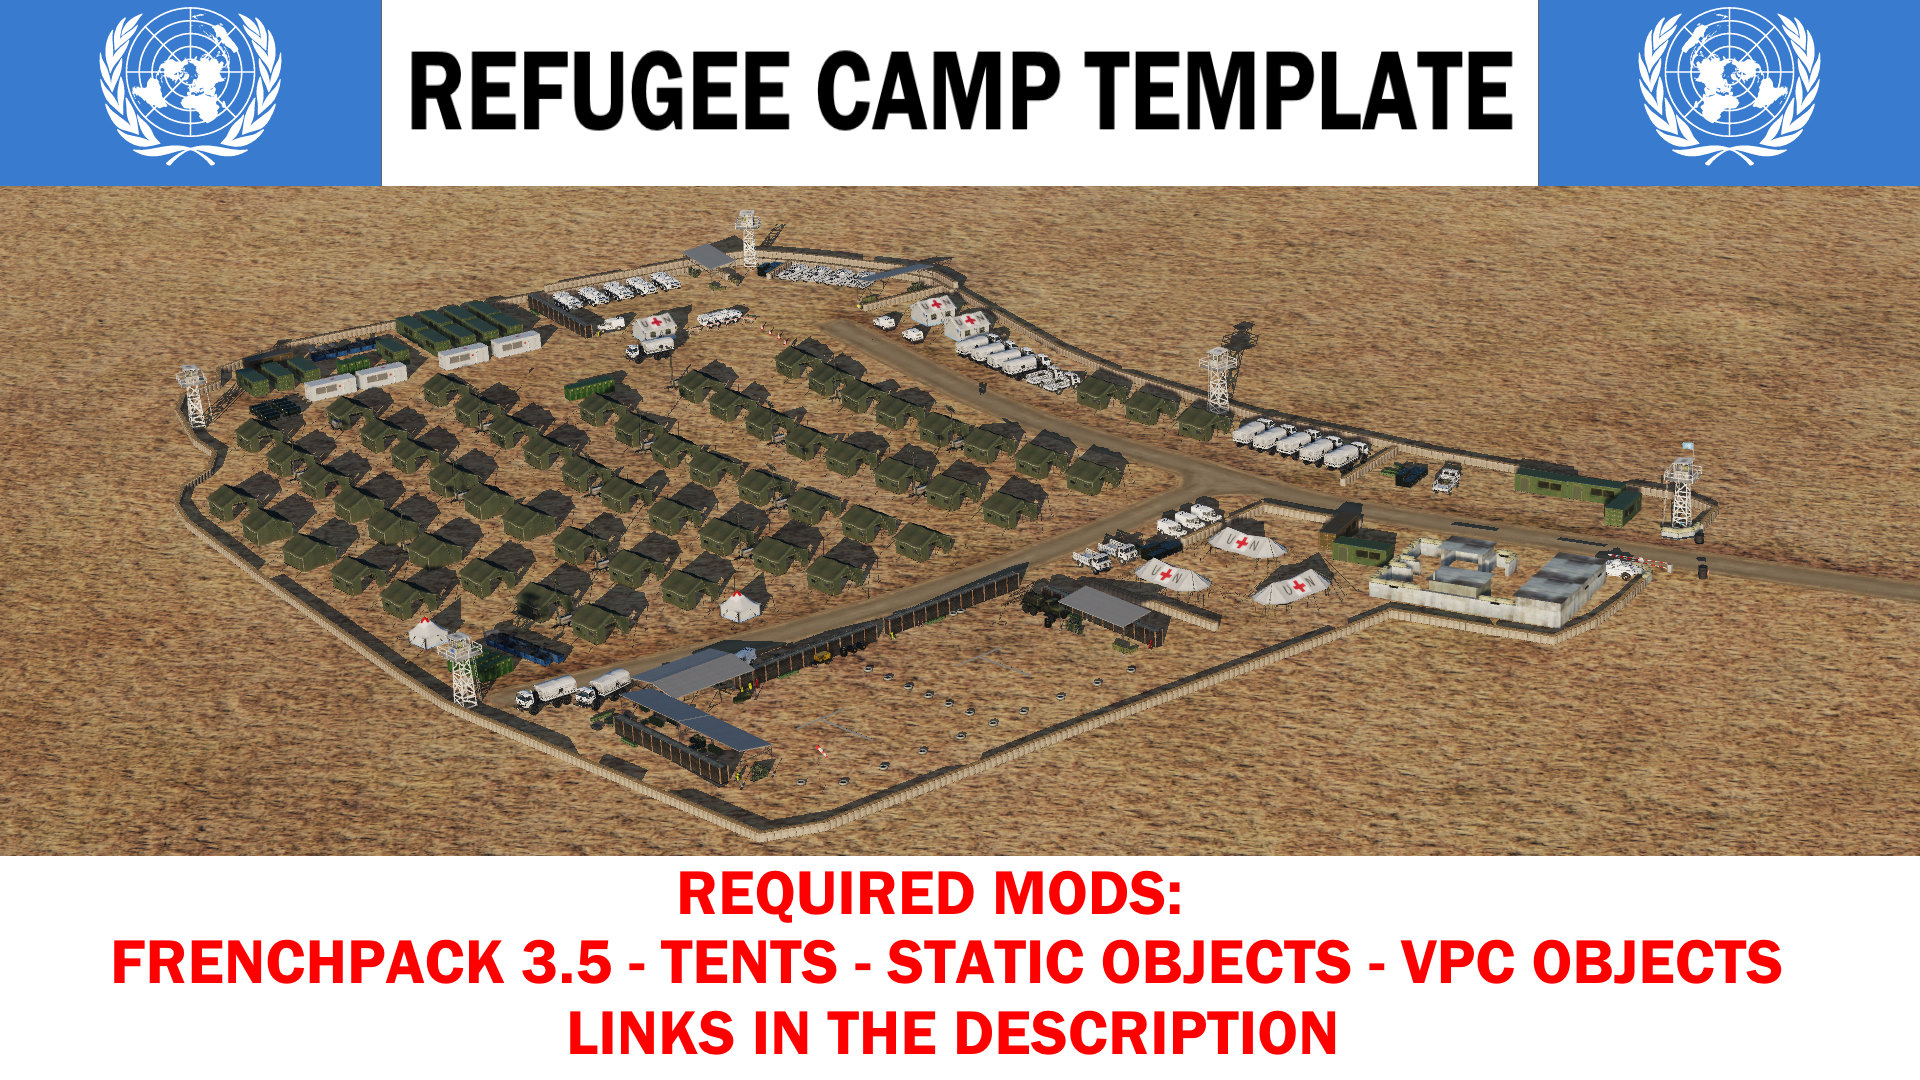 United Nations Refugee Camp Template (SoH map)